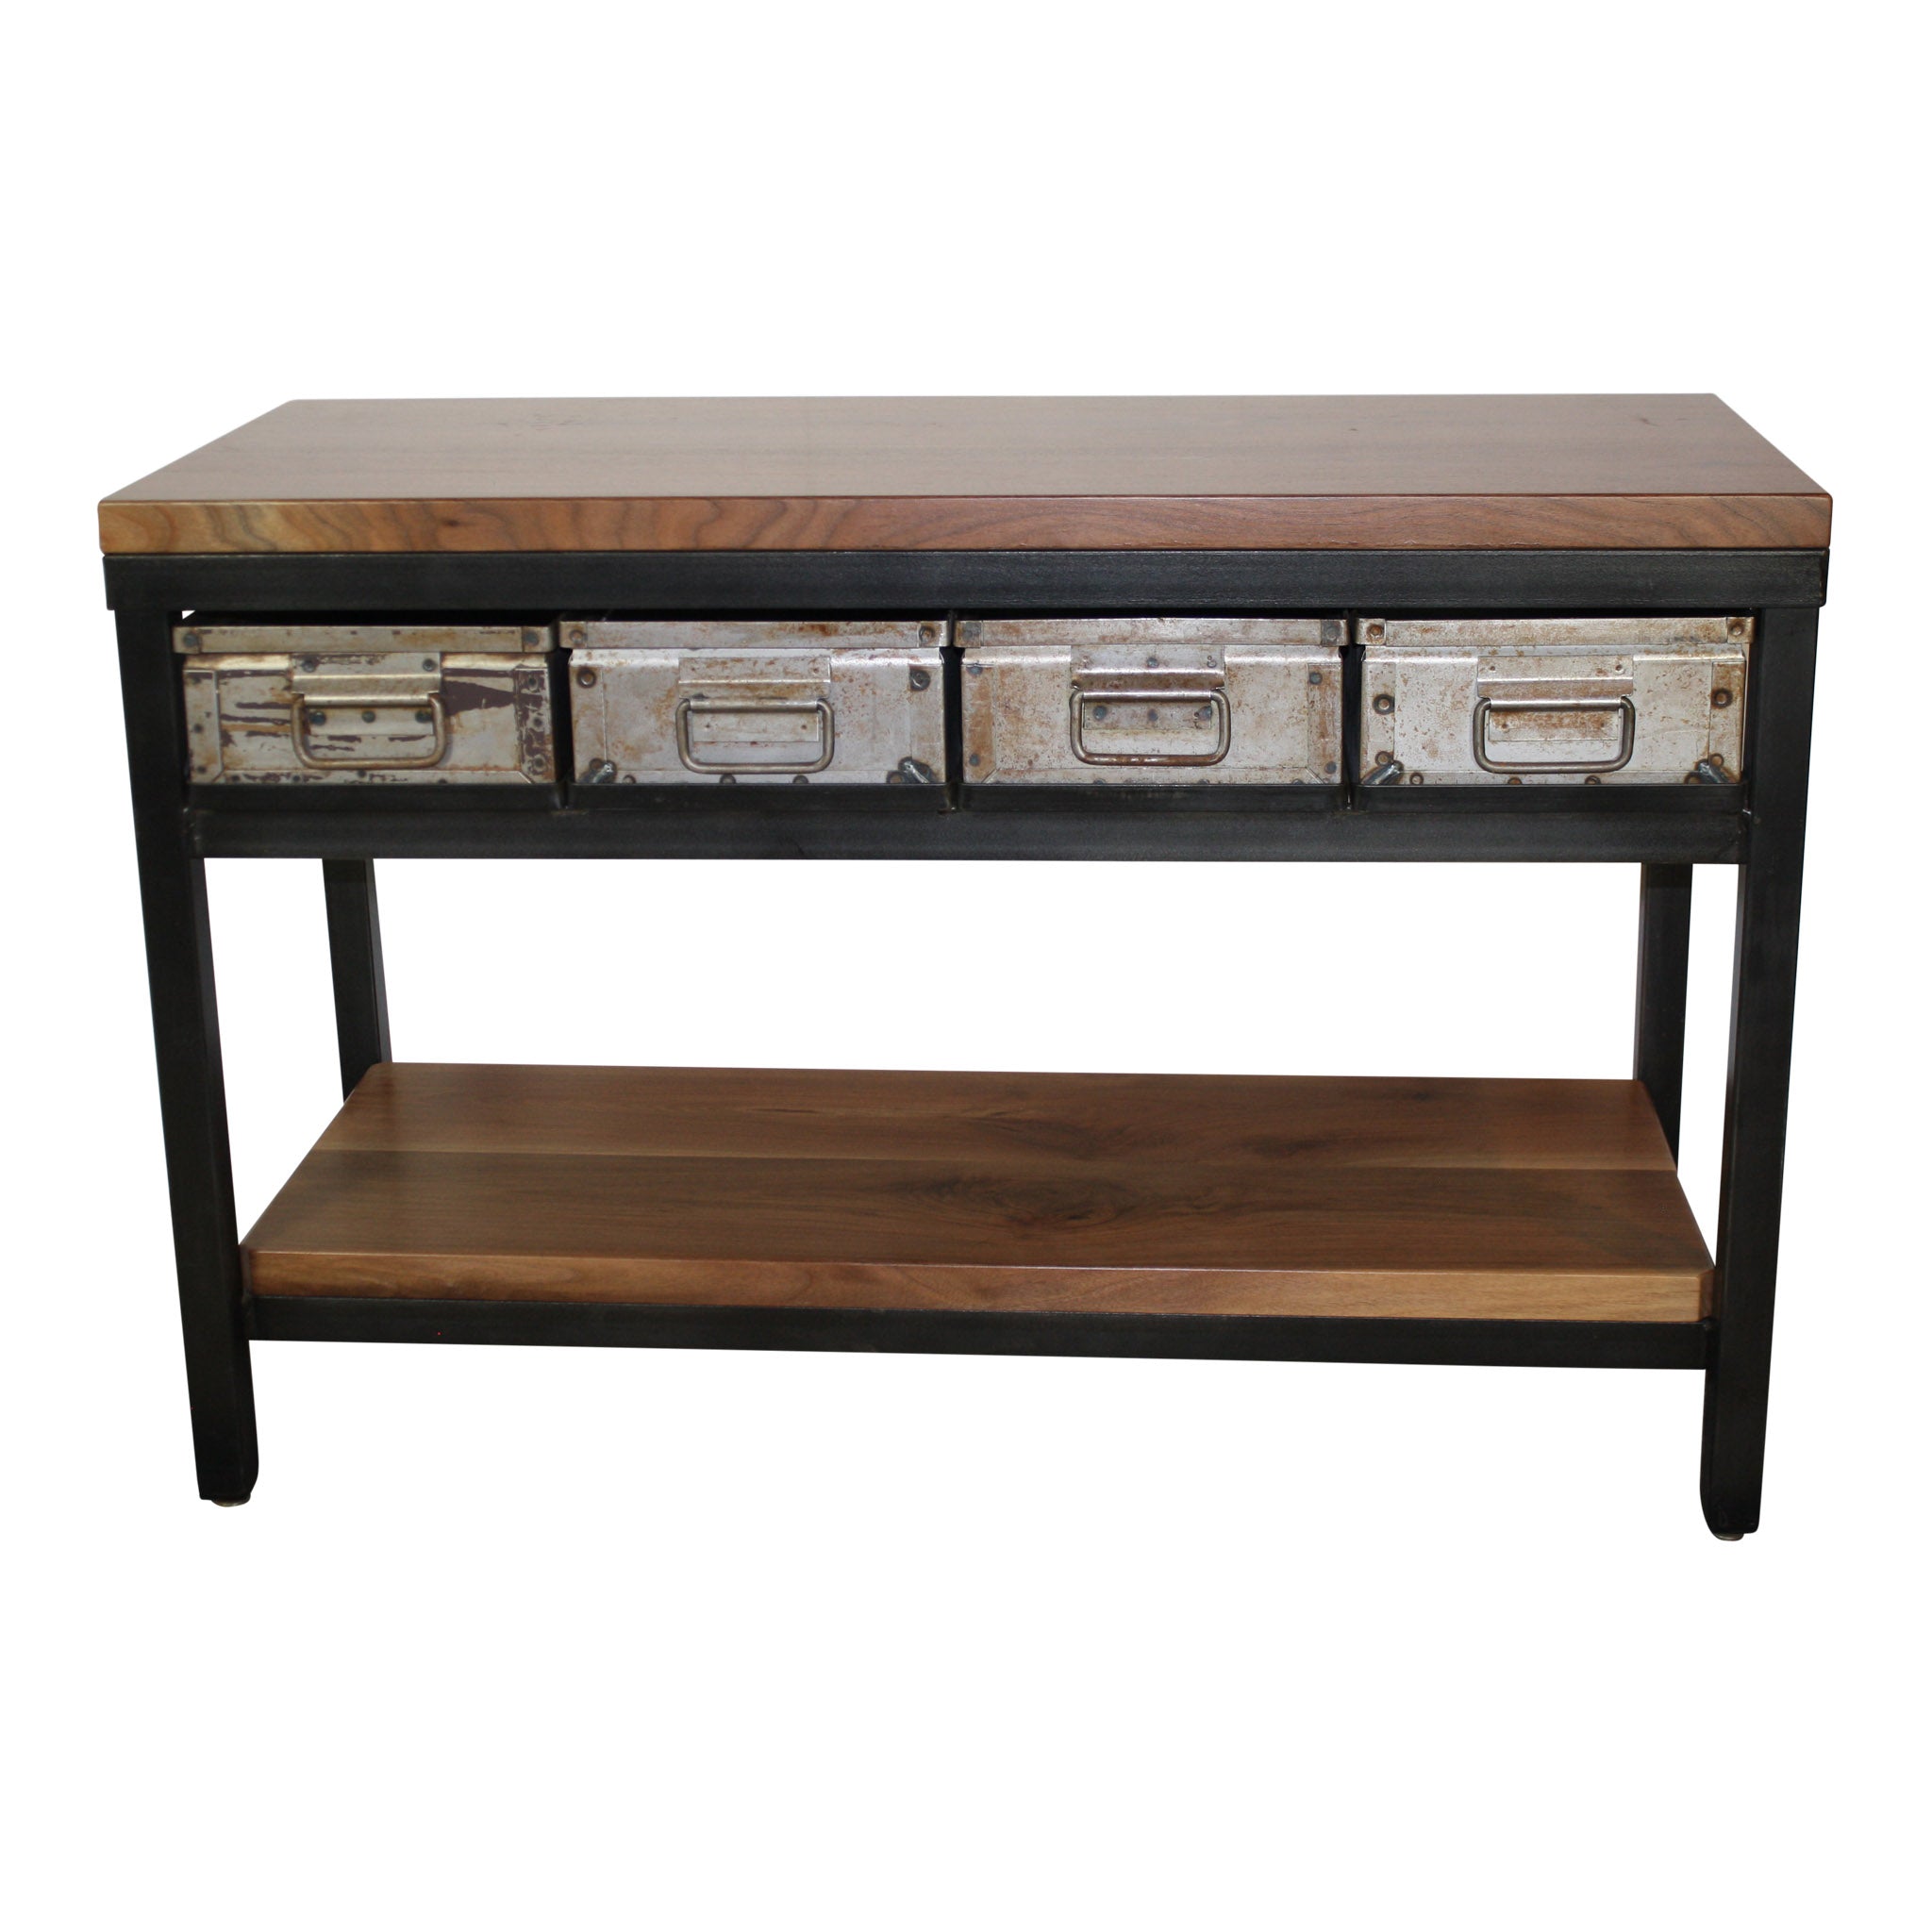 Industrial Console Table with Steel Bins